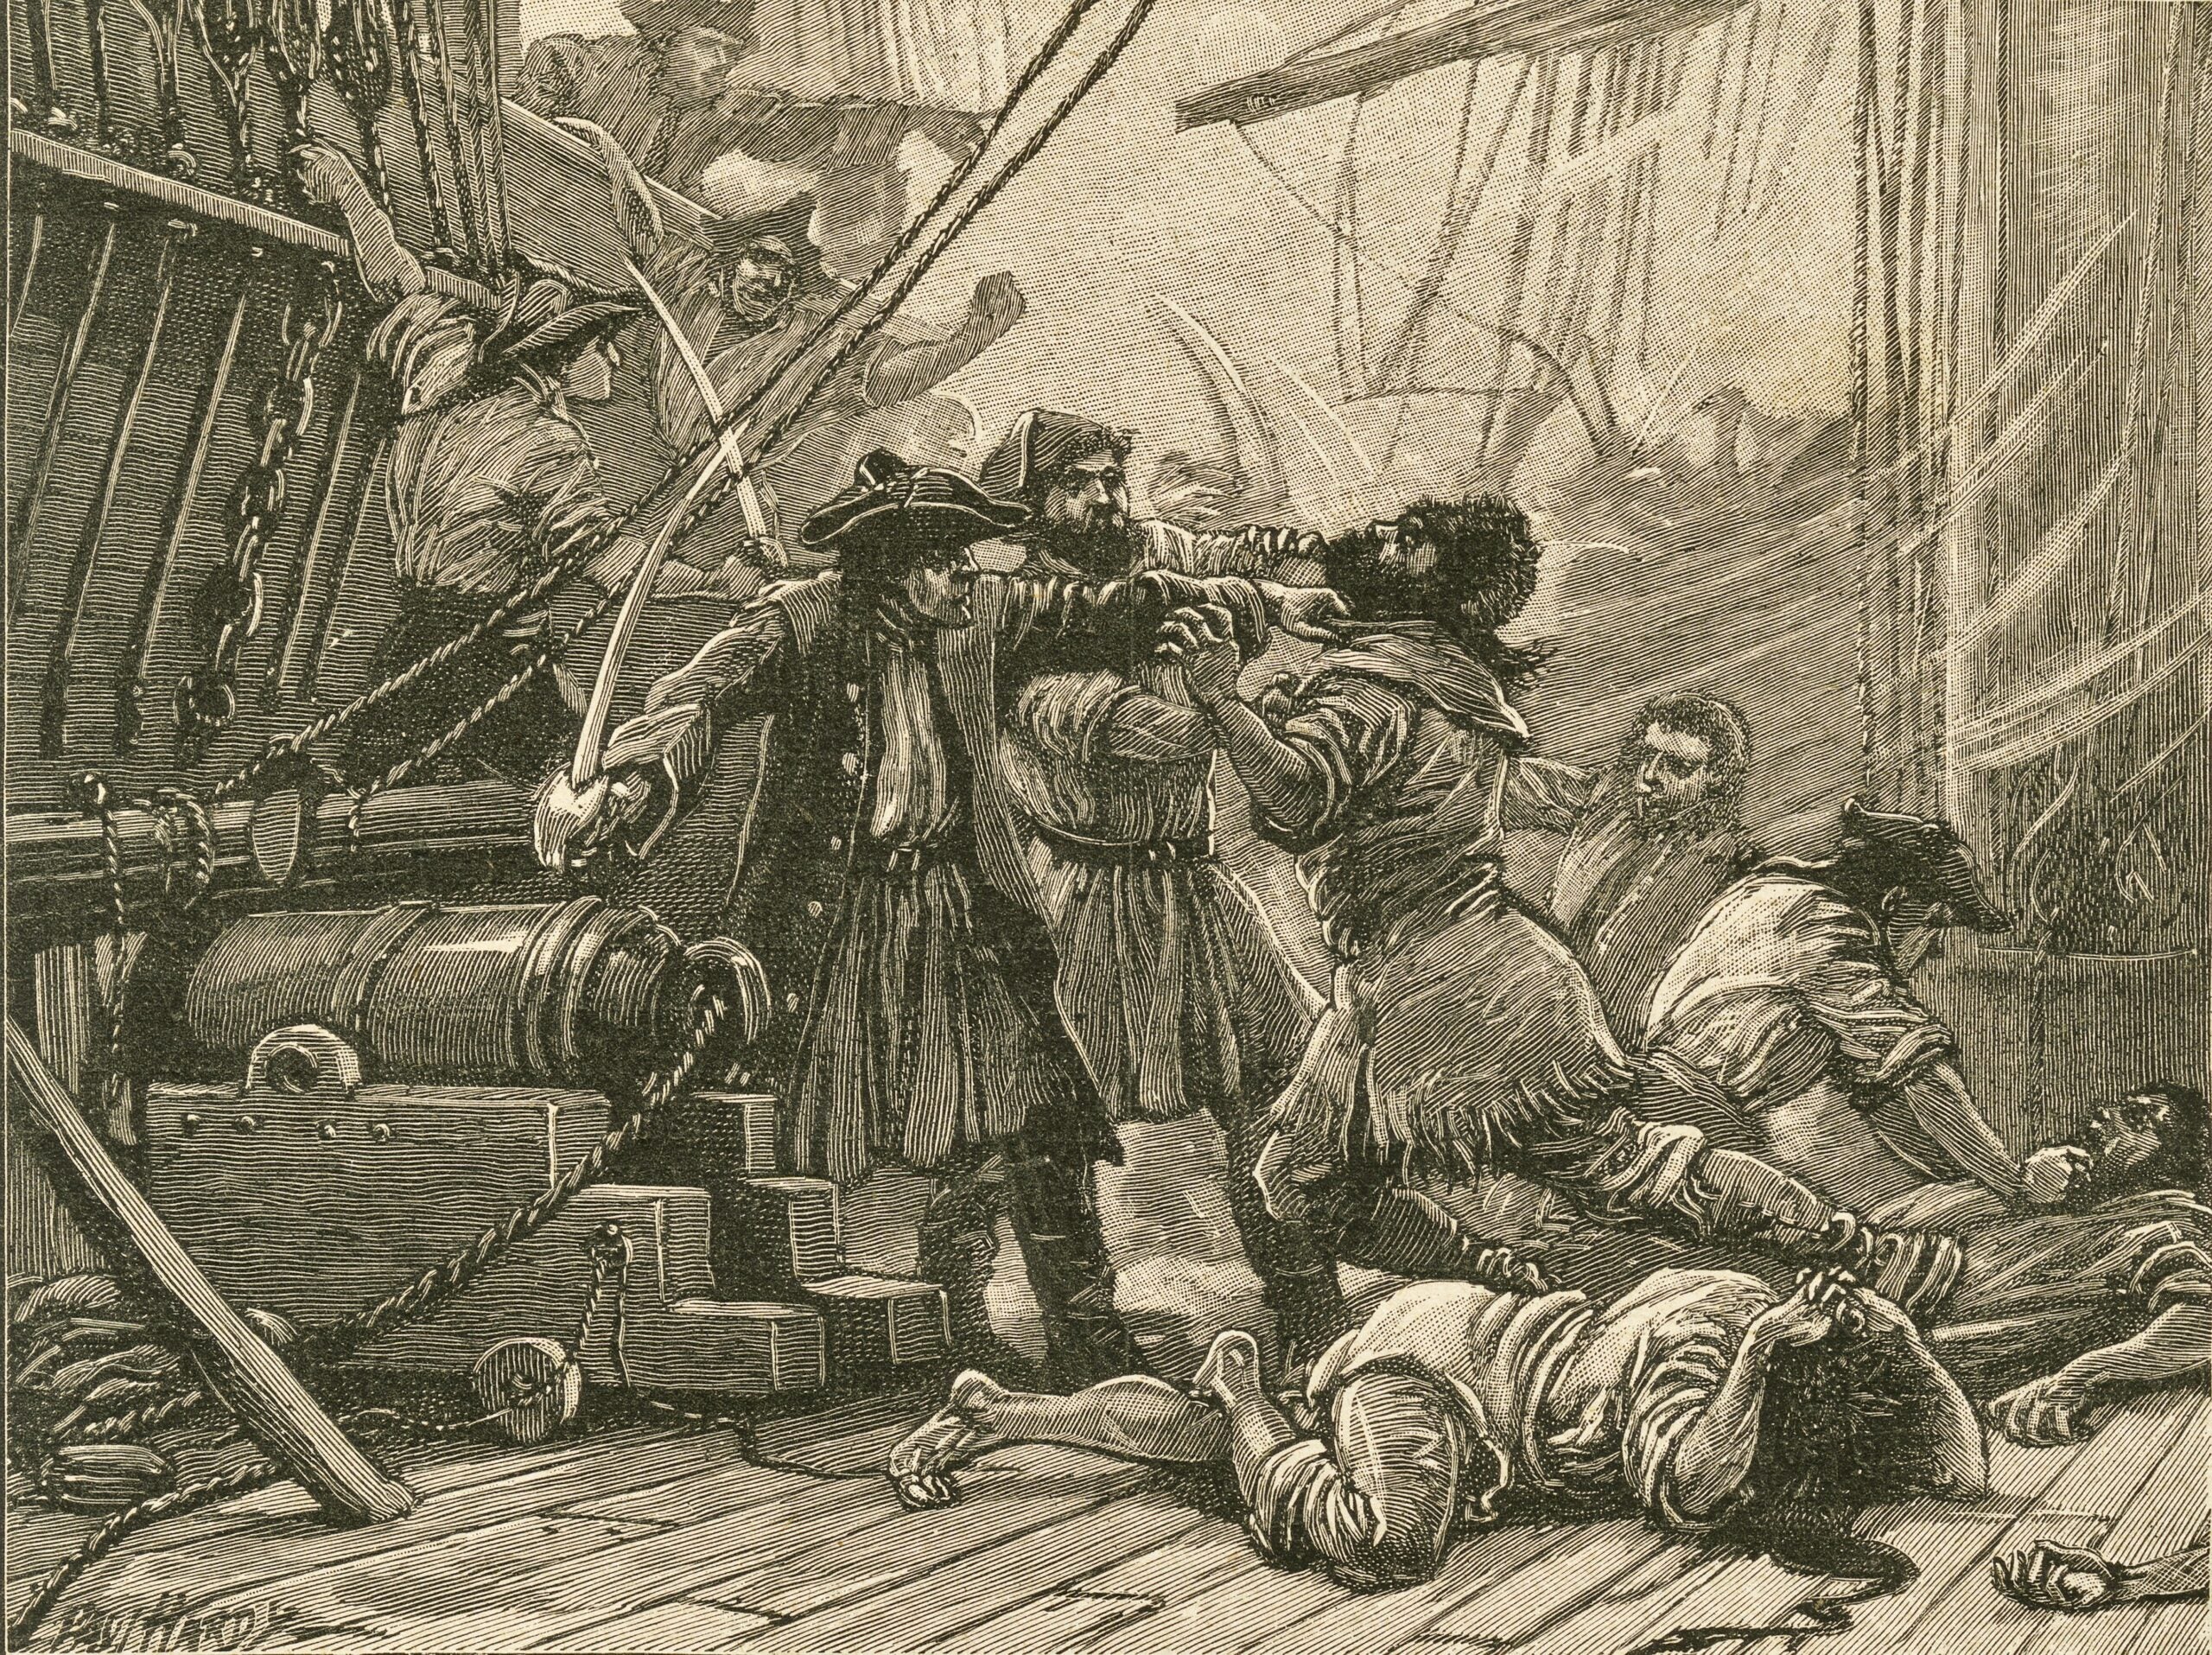 Pirates boarding a ship and overpower the crew: 18th century. (Photo by: Universal History Archive/Universal Images Group via Getty Images)